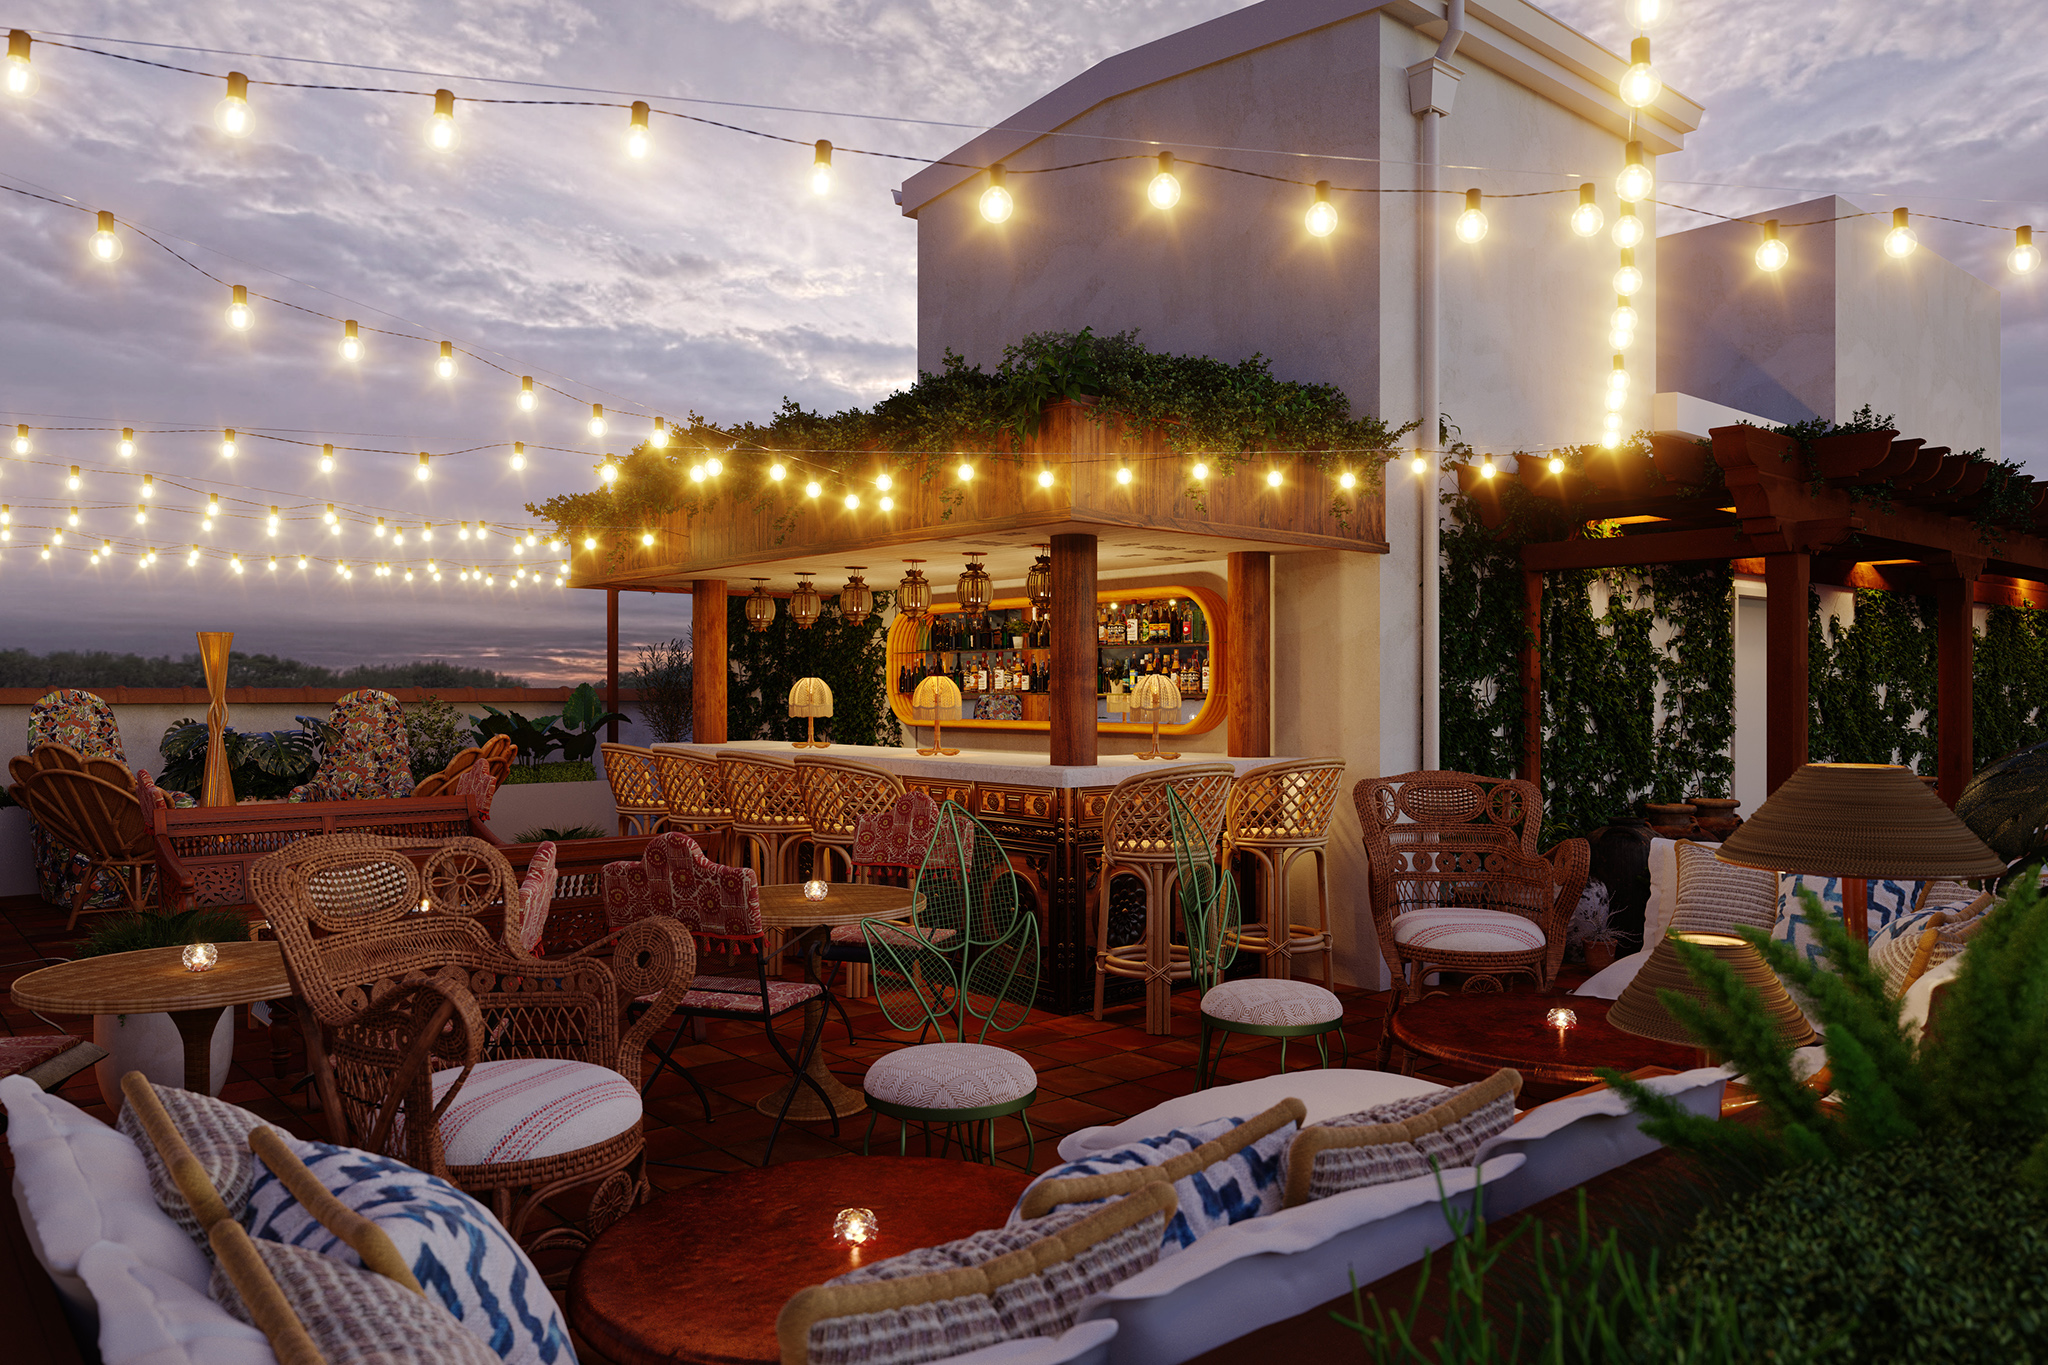 Historic Palo Alto hotel reopens with new name, rooftop bar